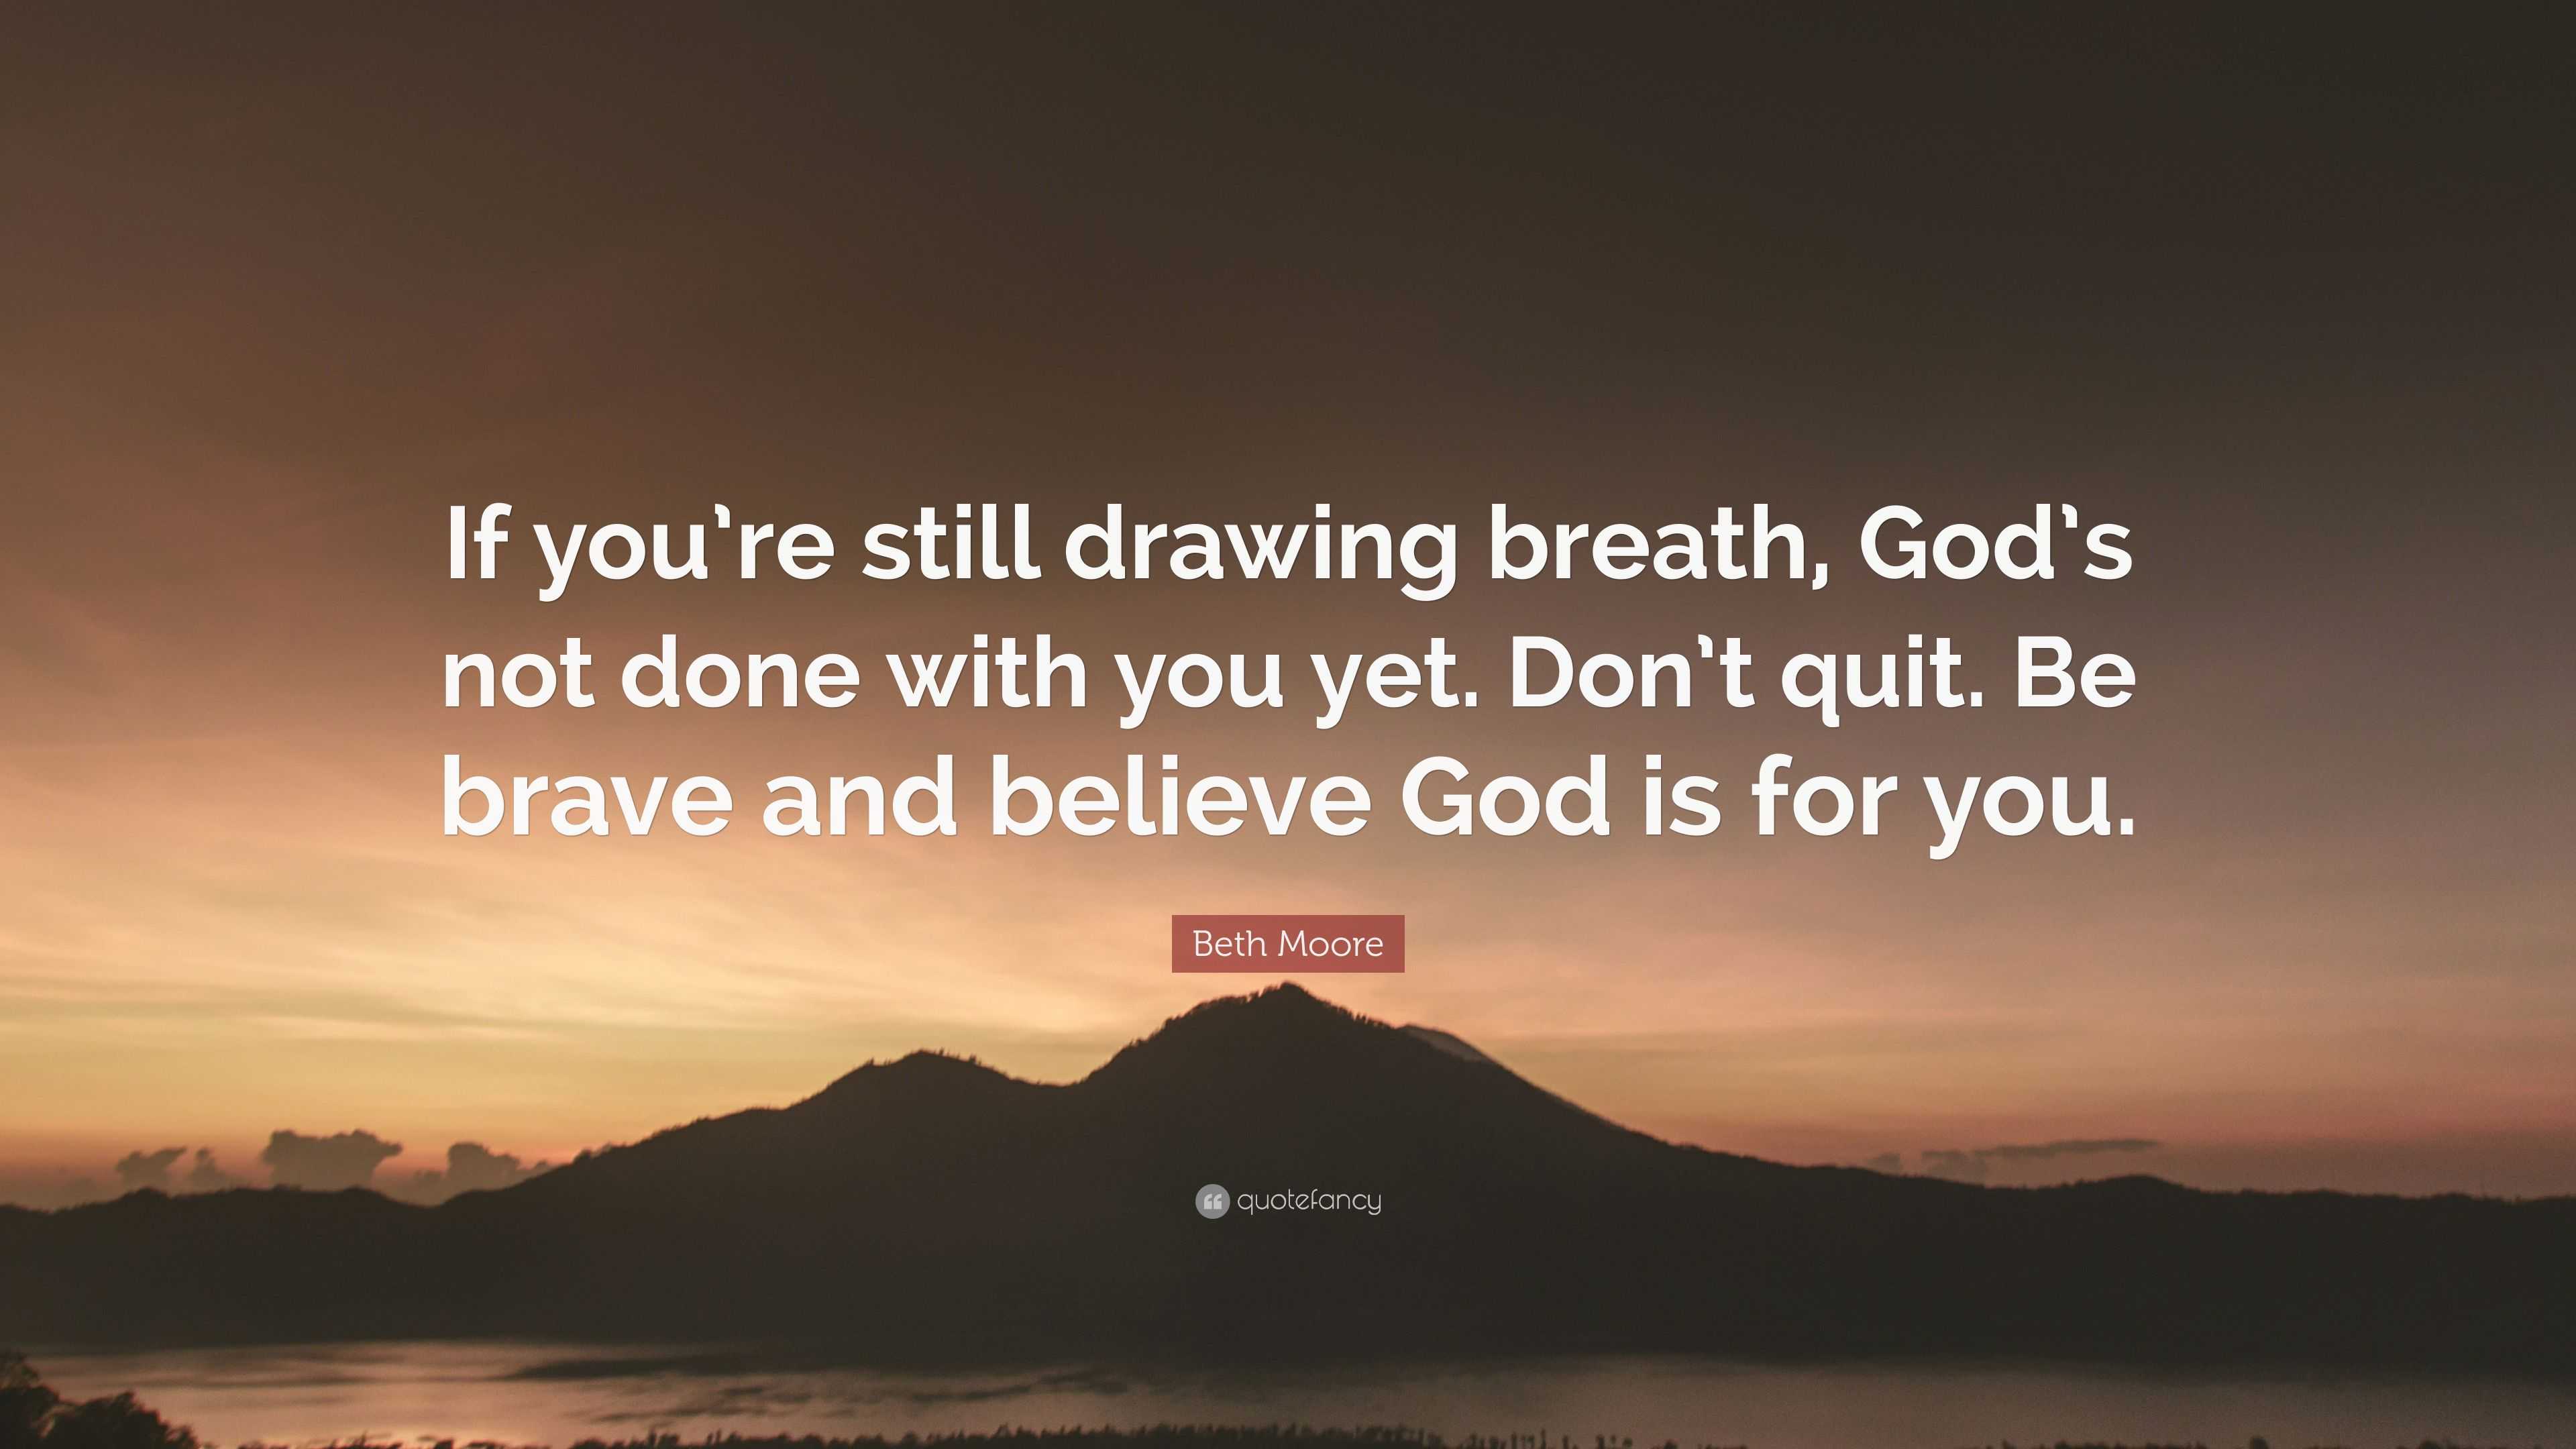 Beth Moore Quote: "If you're still drawing breath, God's ...